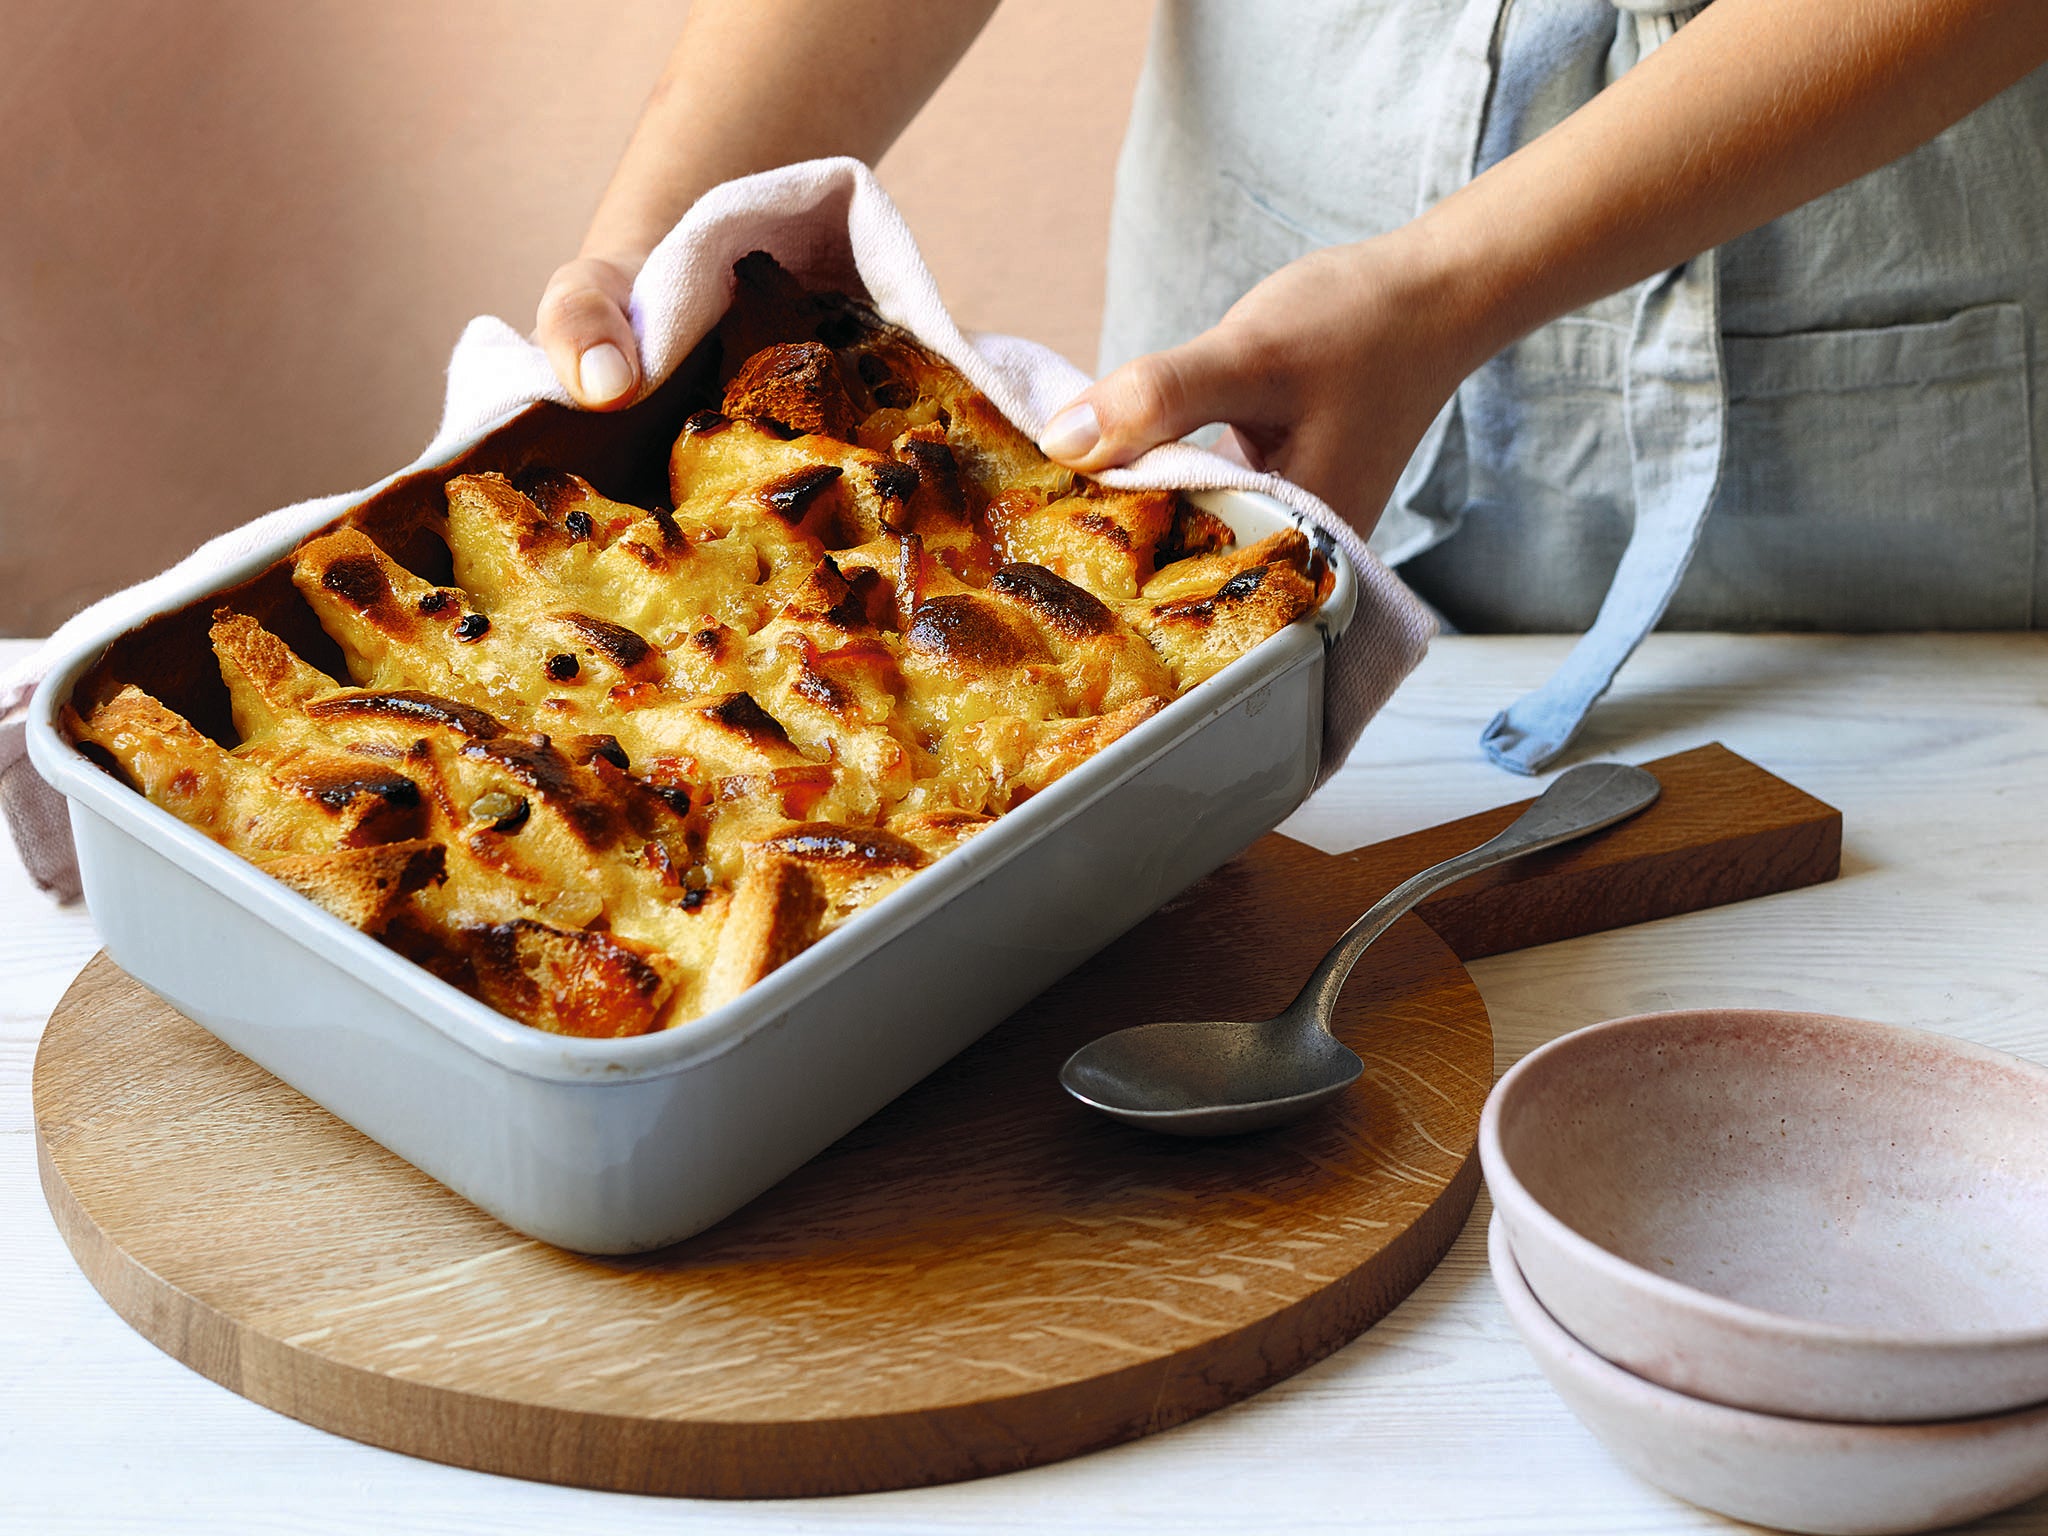 Beskow created a vegan bread and butter pudding recipe too (Luke Albert)